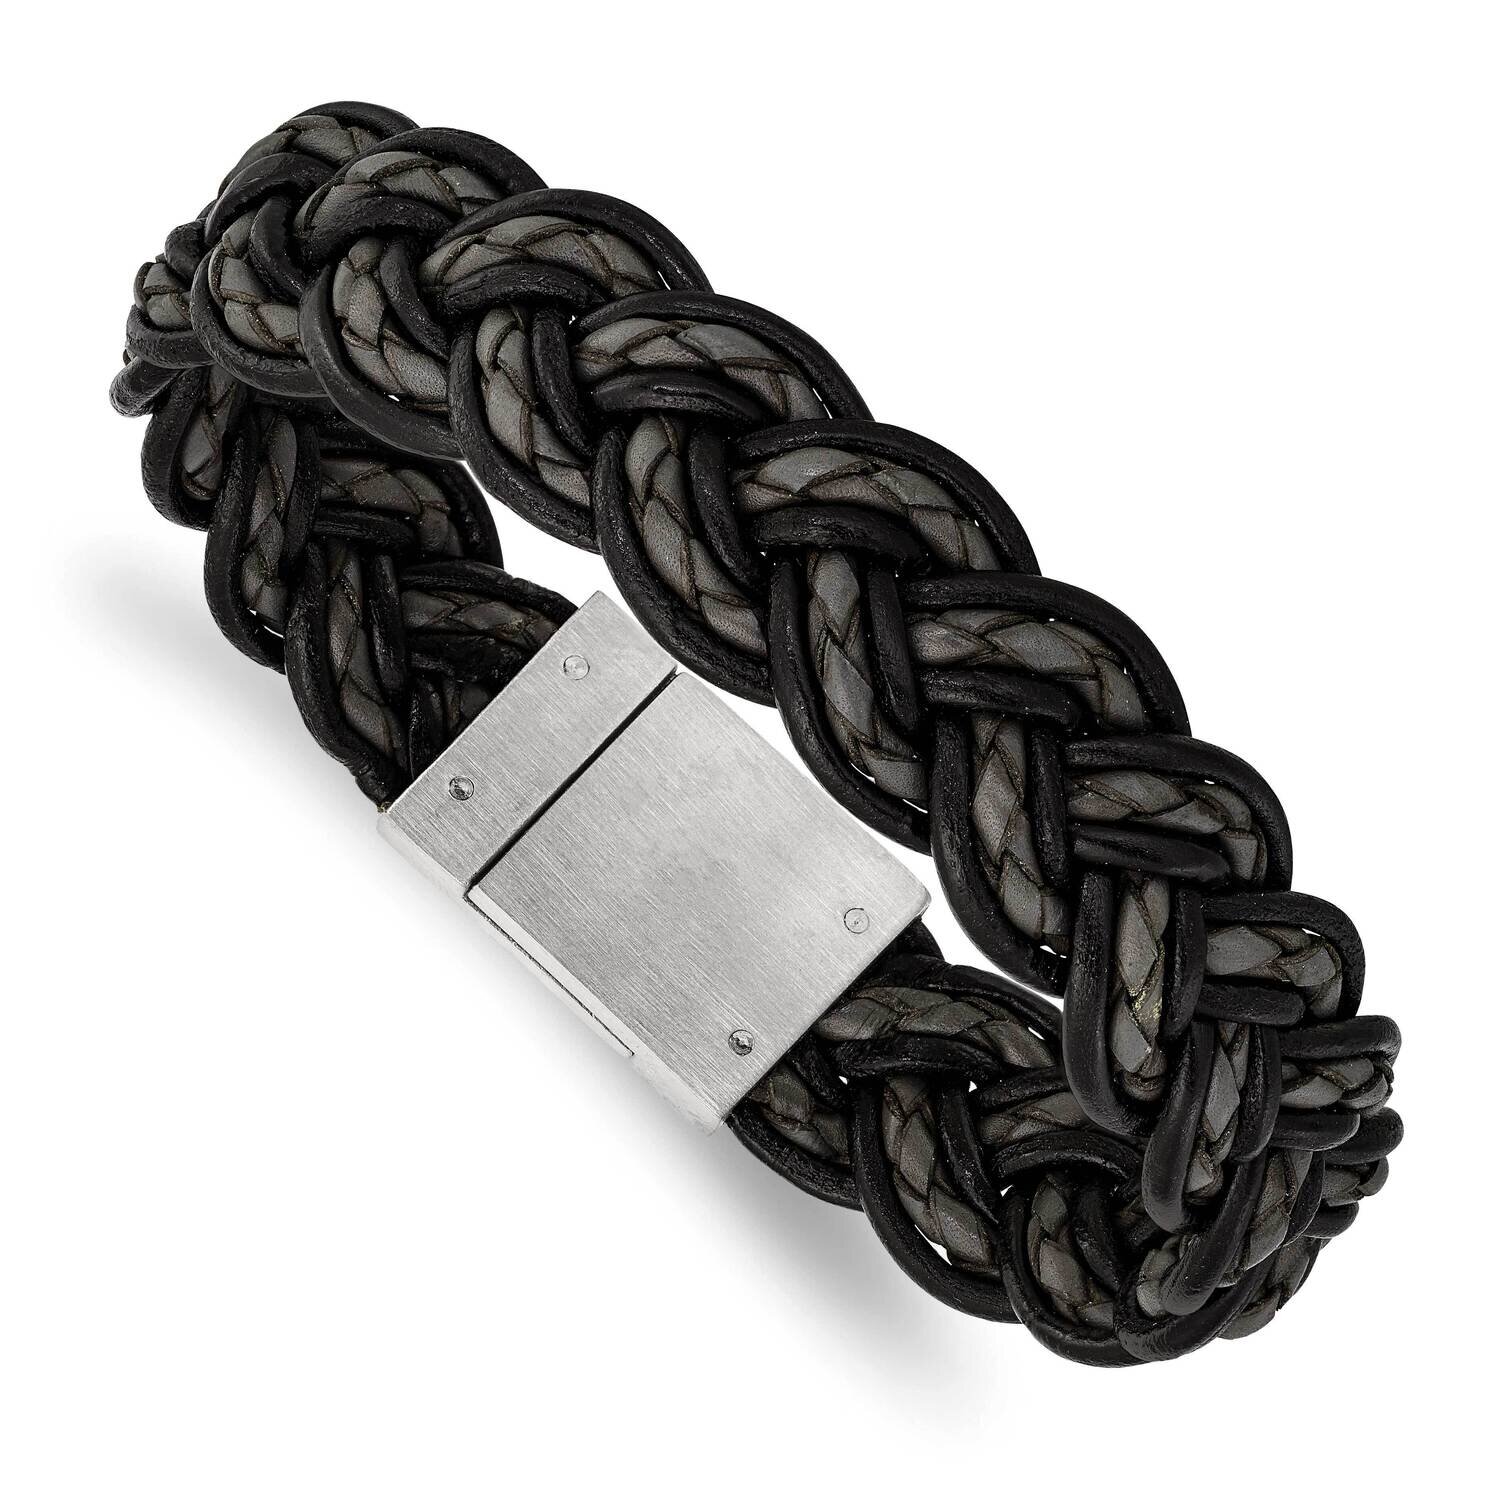 Black and Grey Woven Leather Bracelet Stainless Steel Brushed SRB1342-8.5